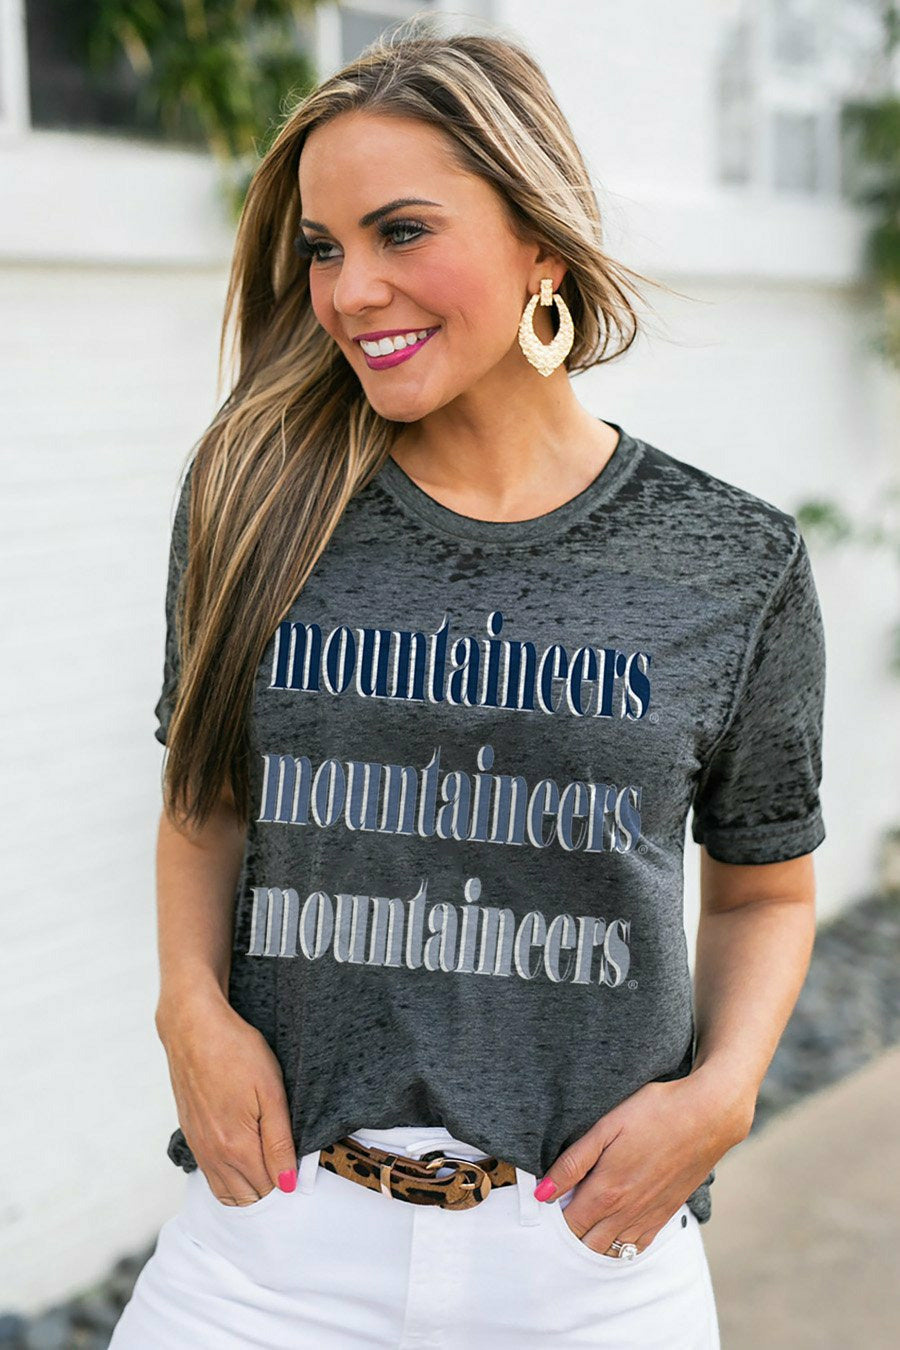 "MOUNTAINEERS" BF BURNOUT TEE